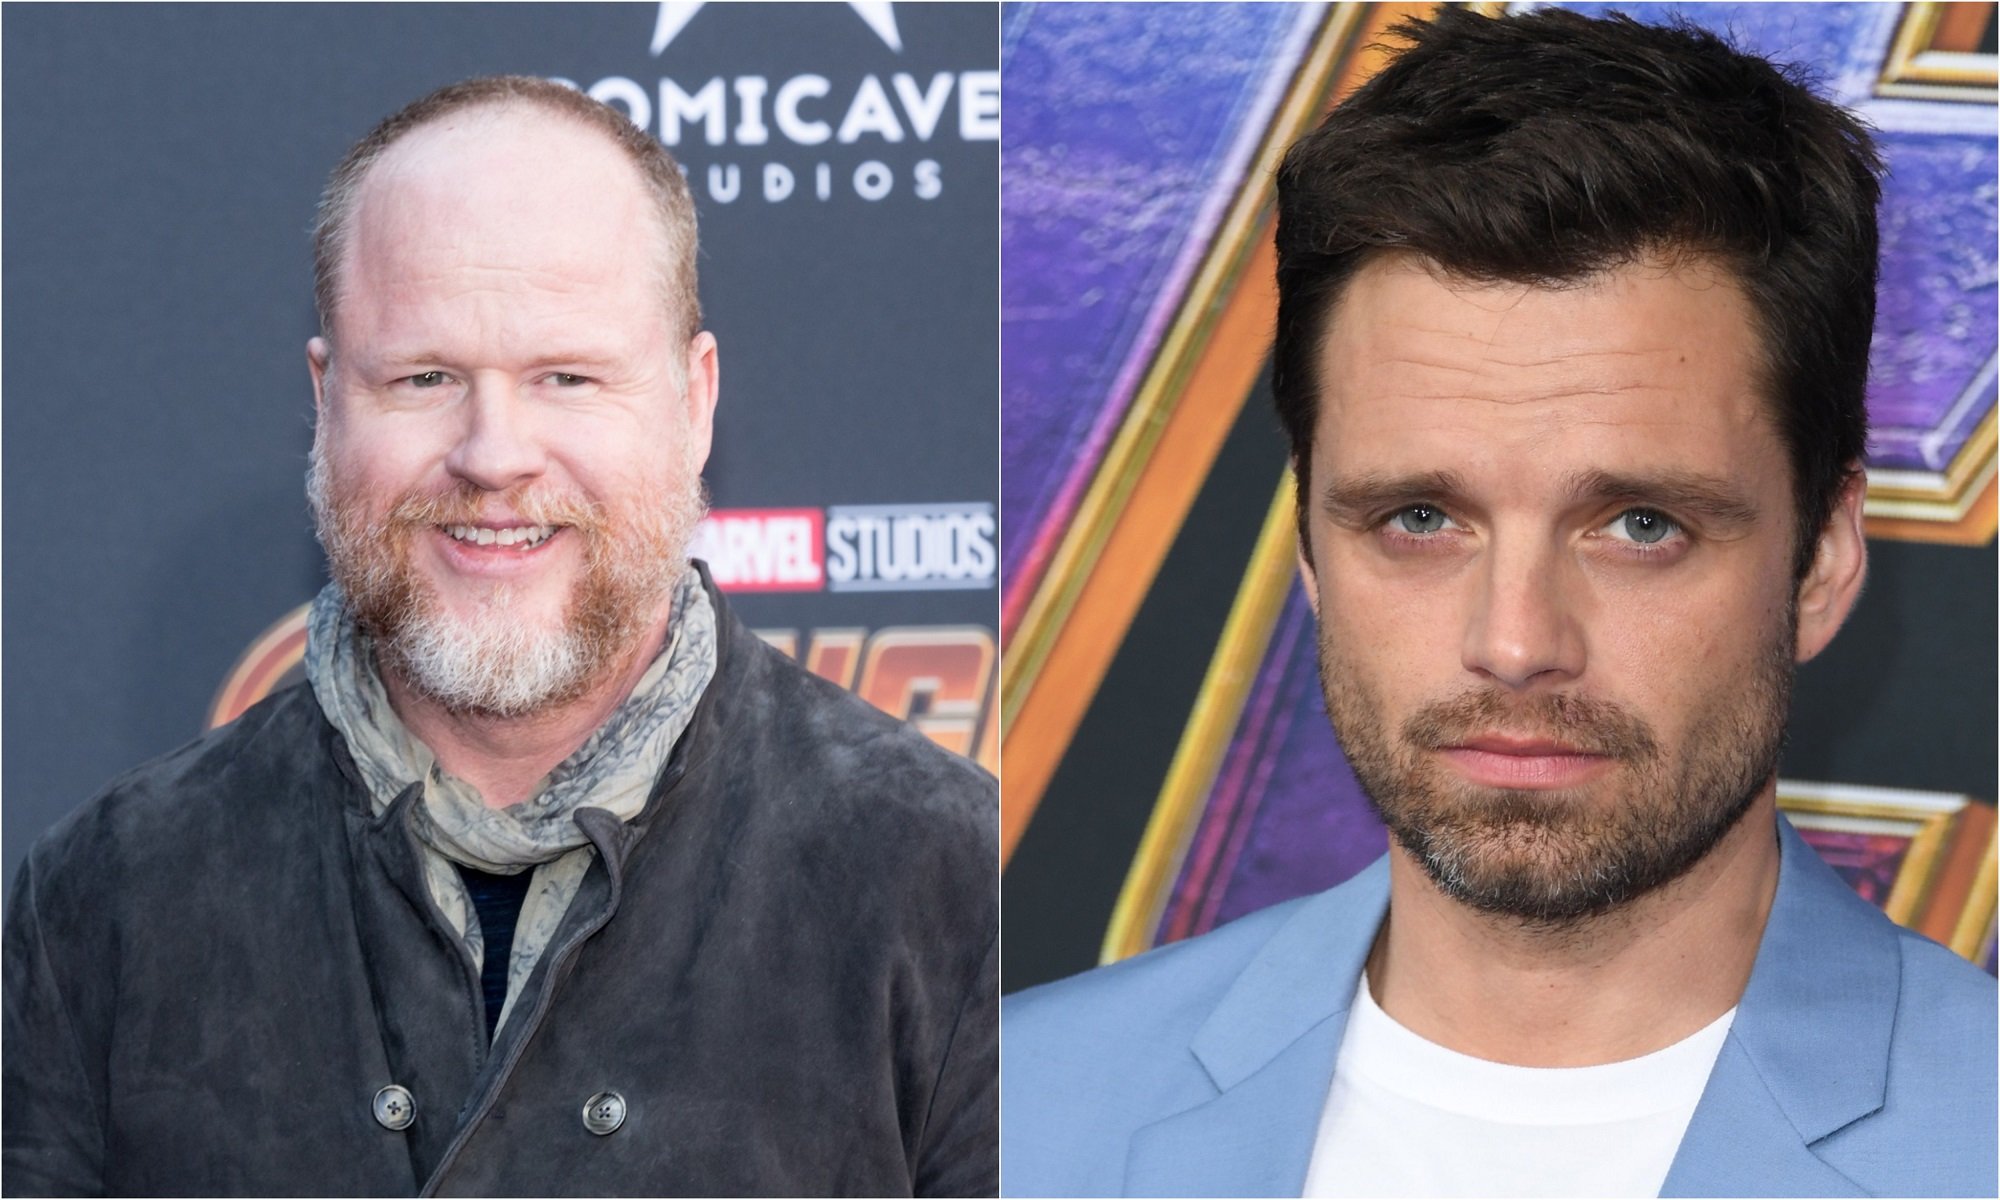 Joss Whedon at the 'Avengers: Infinity War' premiere in 2018 and actor Sebastian Stan at the 'Avengers: Endgame' premiere in 2019